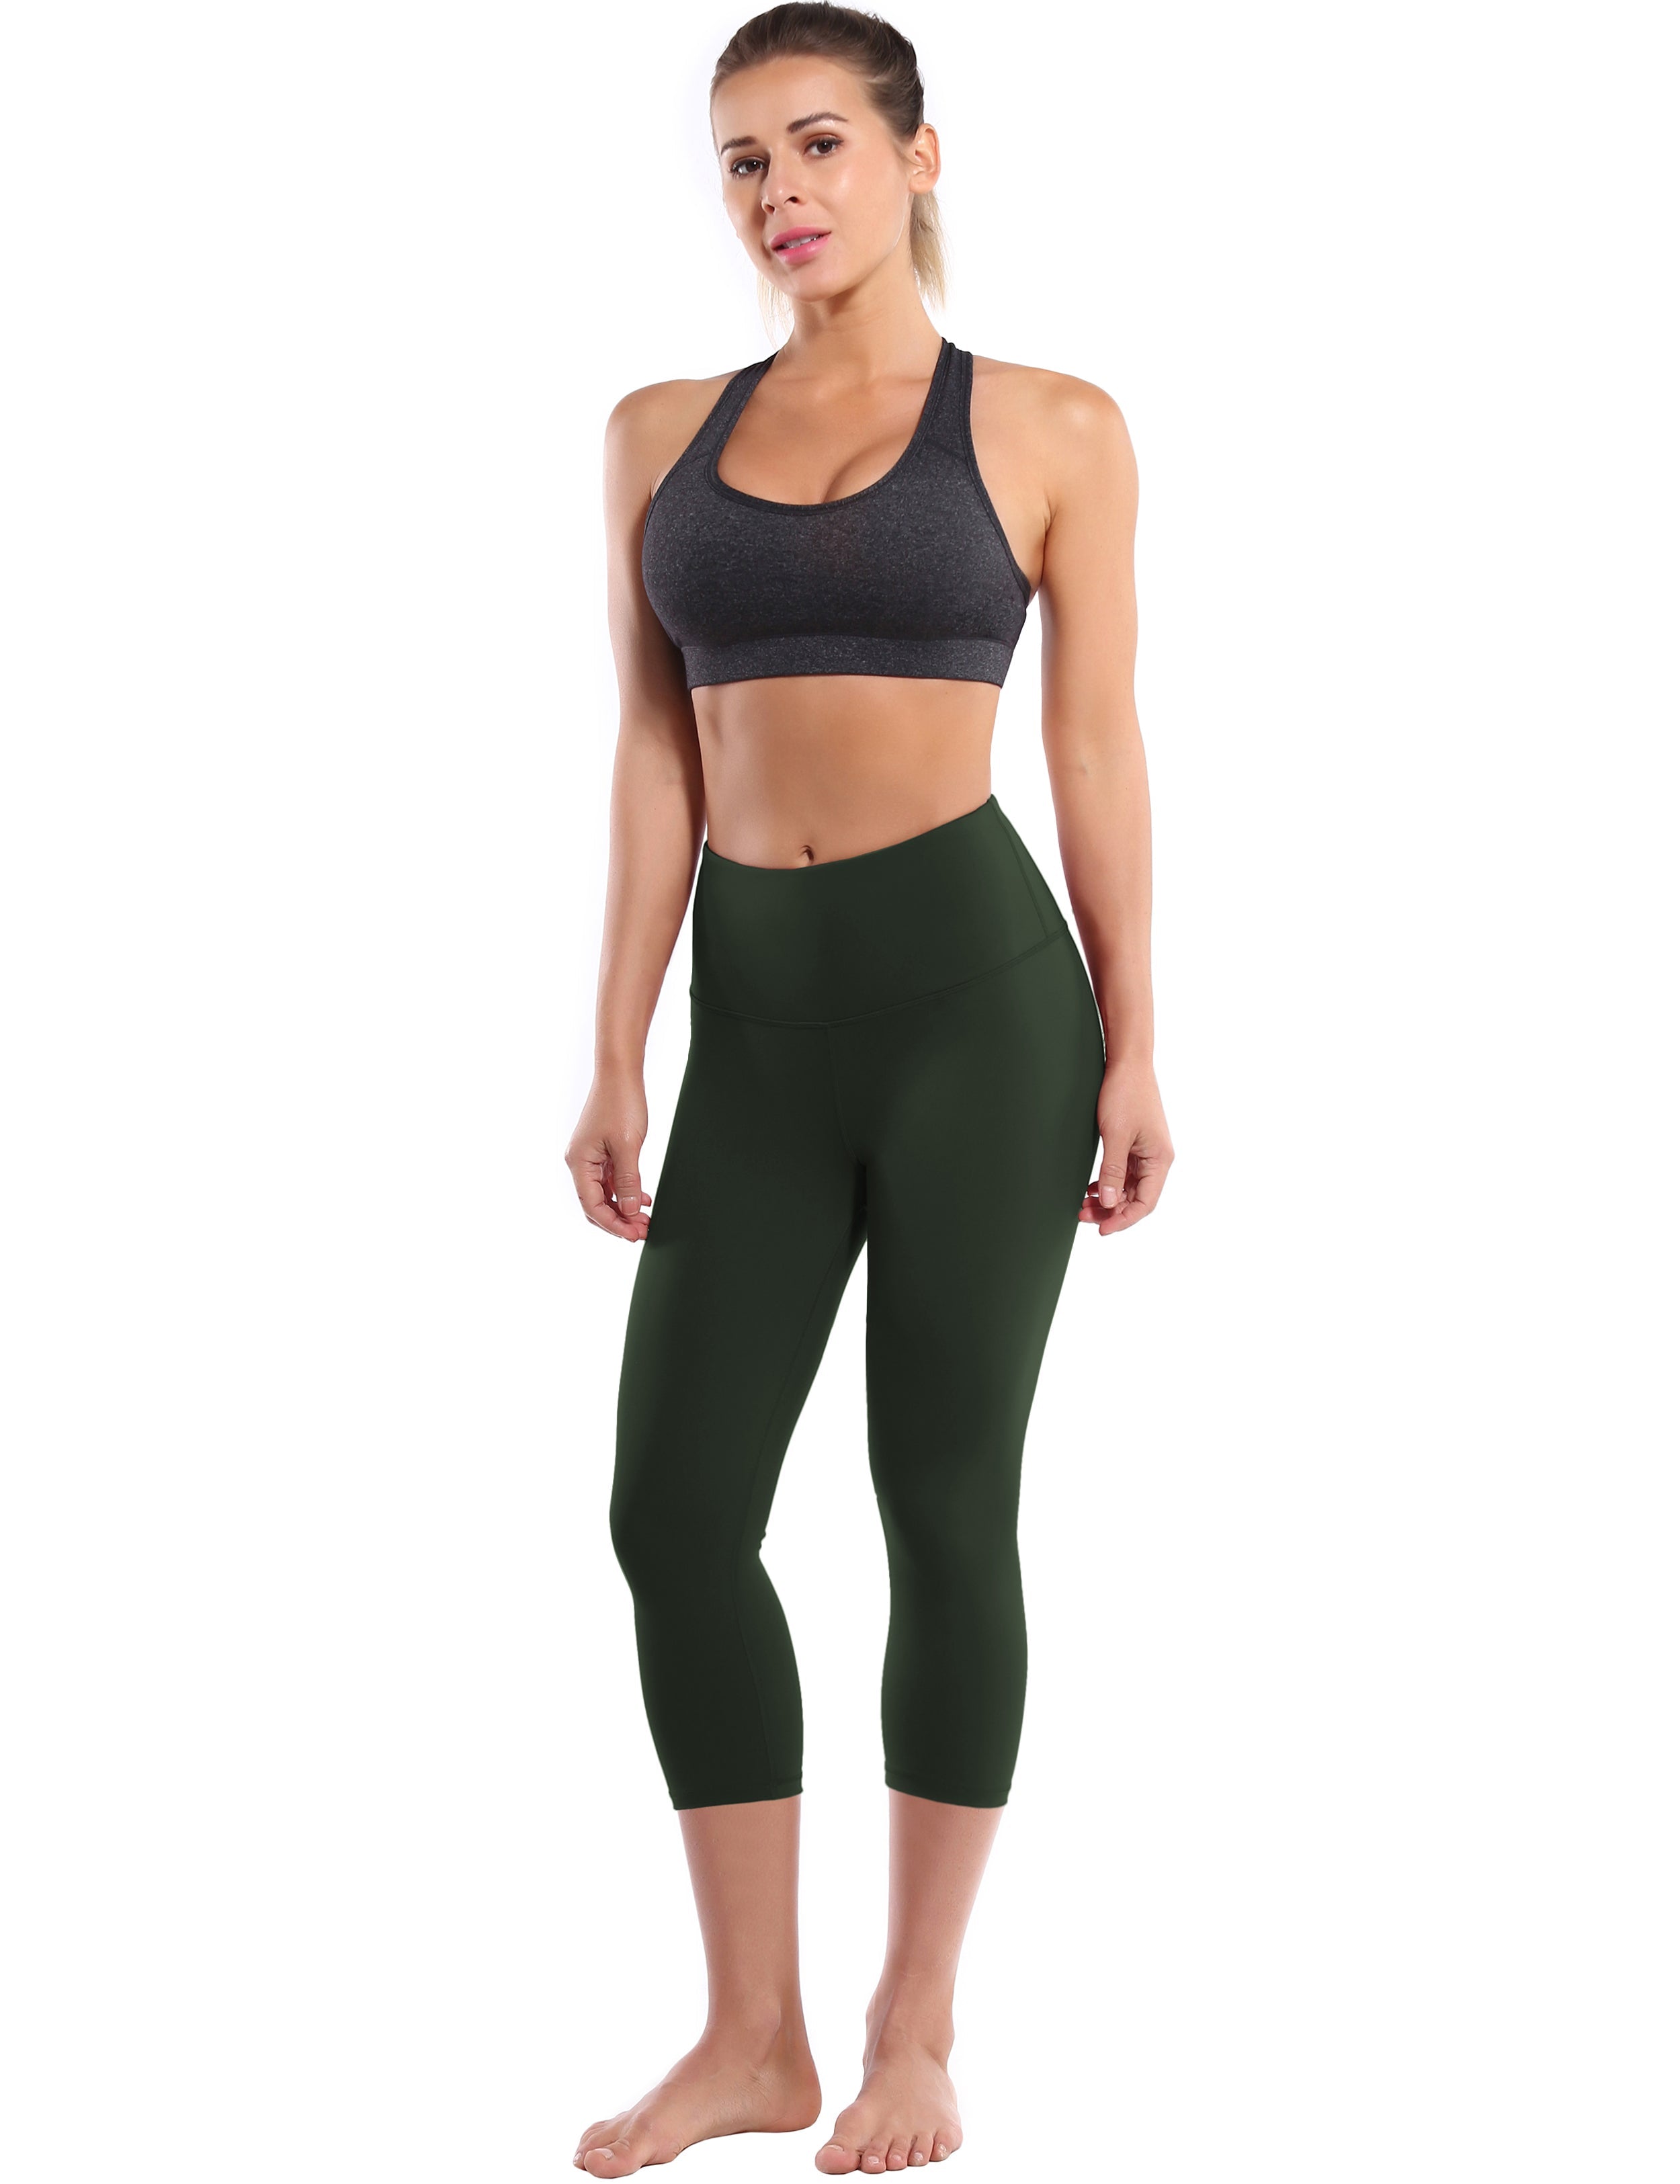 19" High Waist Crop Tight Capris olivegray 75%Nylon/25%Spandex Fabric doesn't attract lint easily 4-way stretch No see-through Moisture-wicking Tummy control Inner pocket